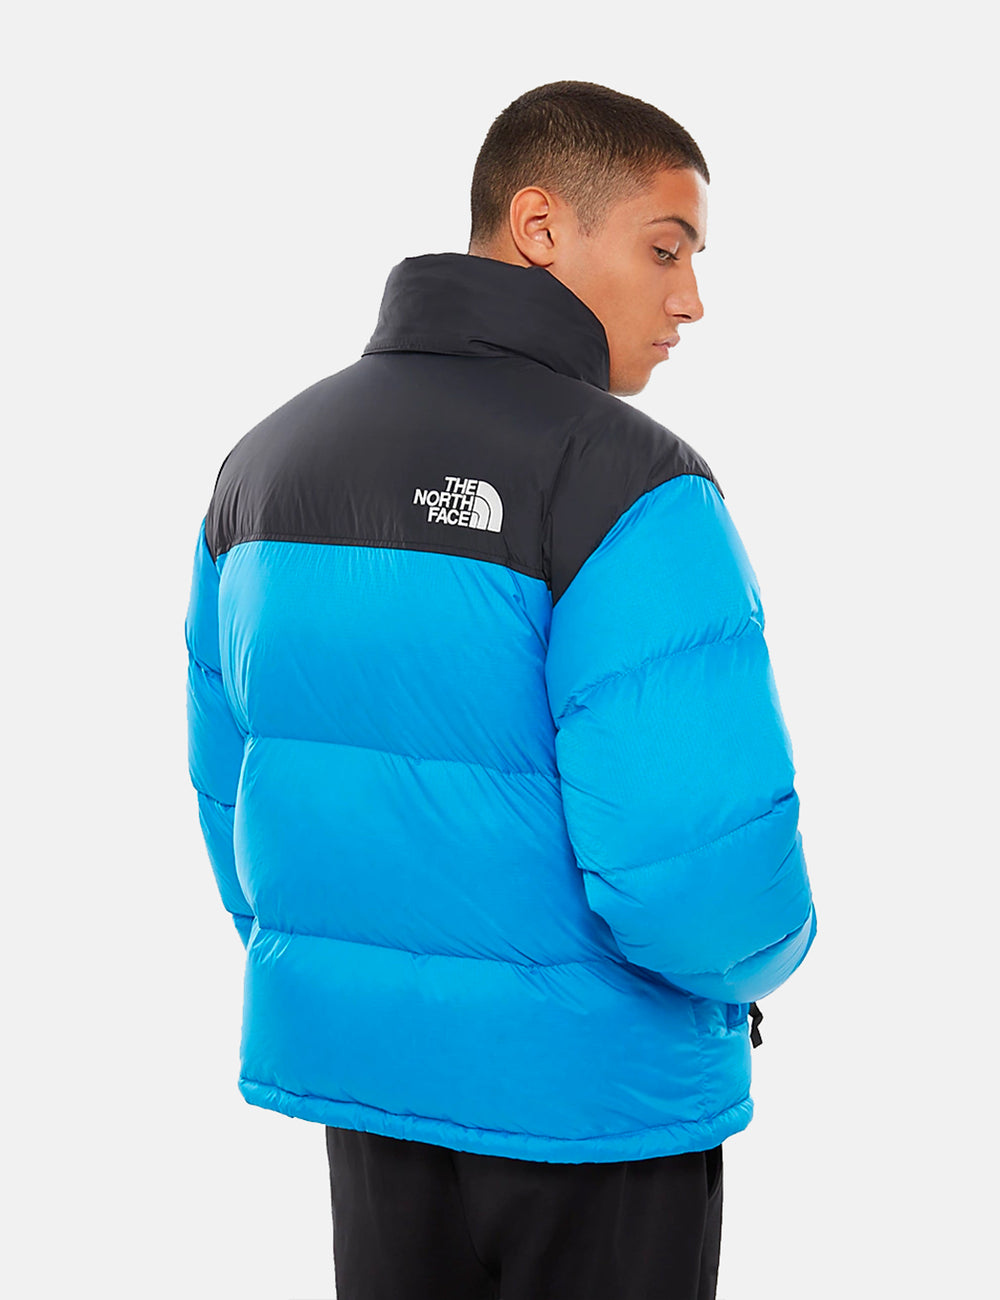 The North Face, Jackets & Coats, The North Face Junction Insulated Puffer  Jacket Clear Lake Blue Mens Size Large